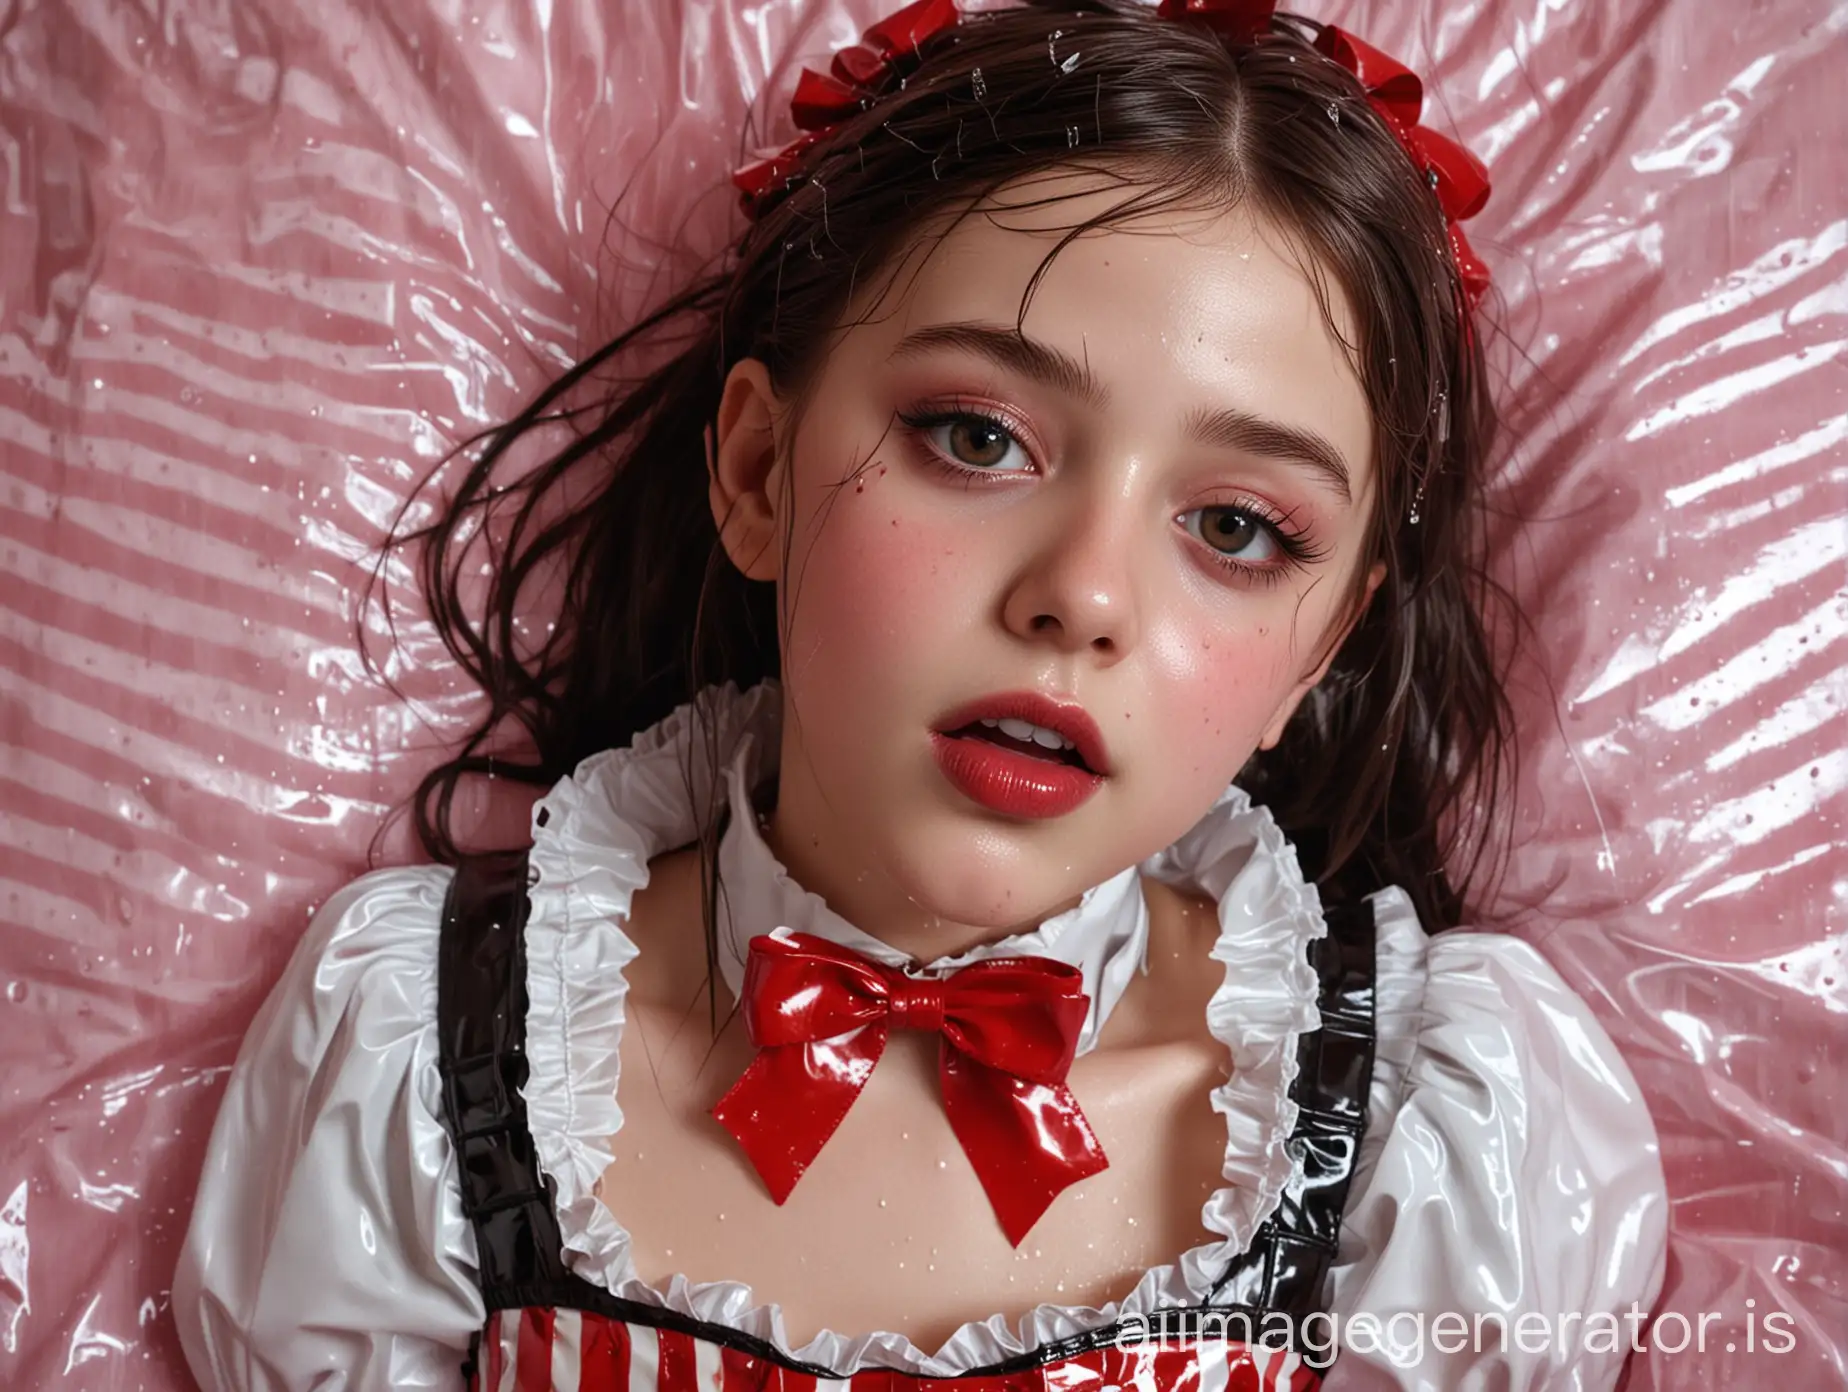 Hyperrealistic-Portrait-of-a-French-Girl-in-Shiny-Latex-Lolita-Outfit-under-Rain